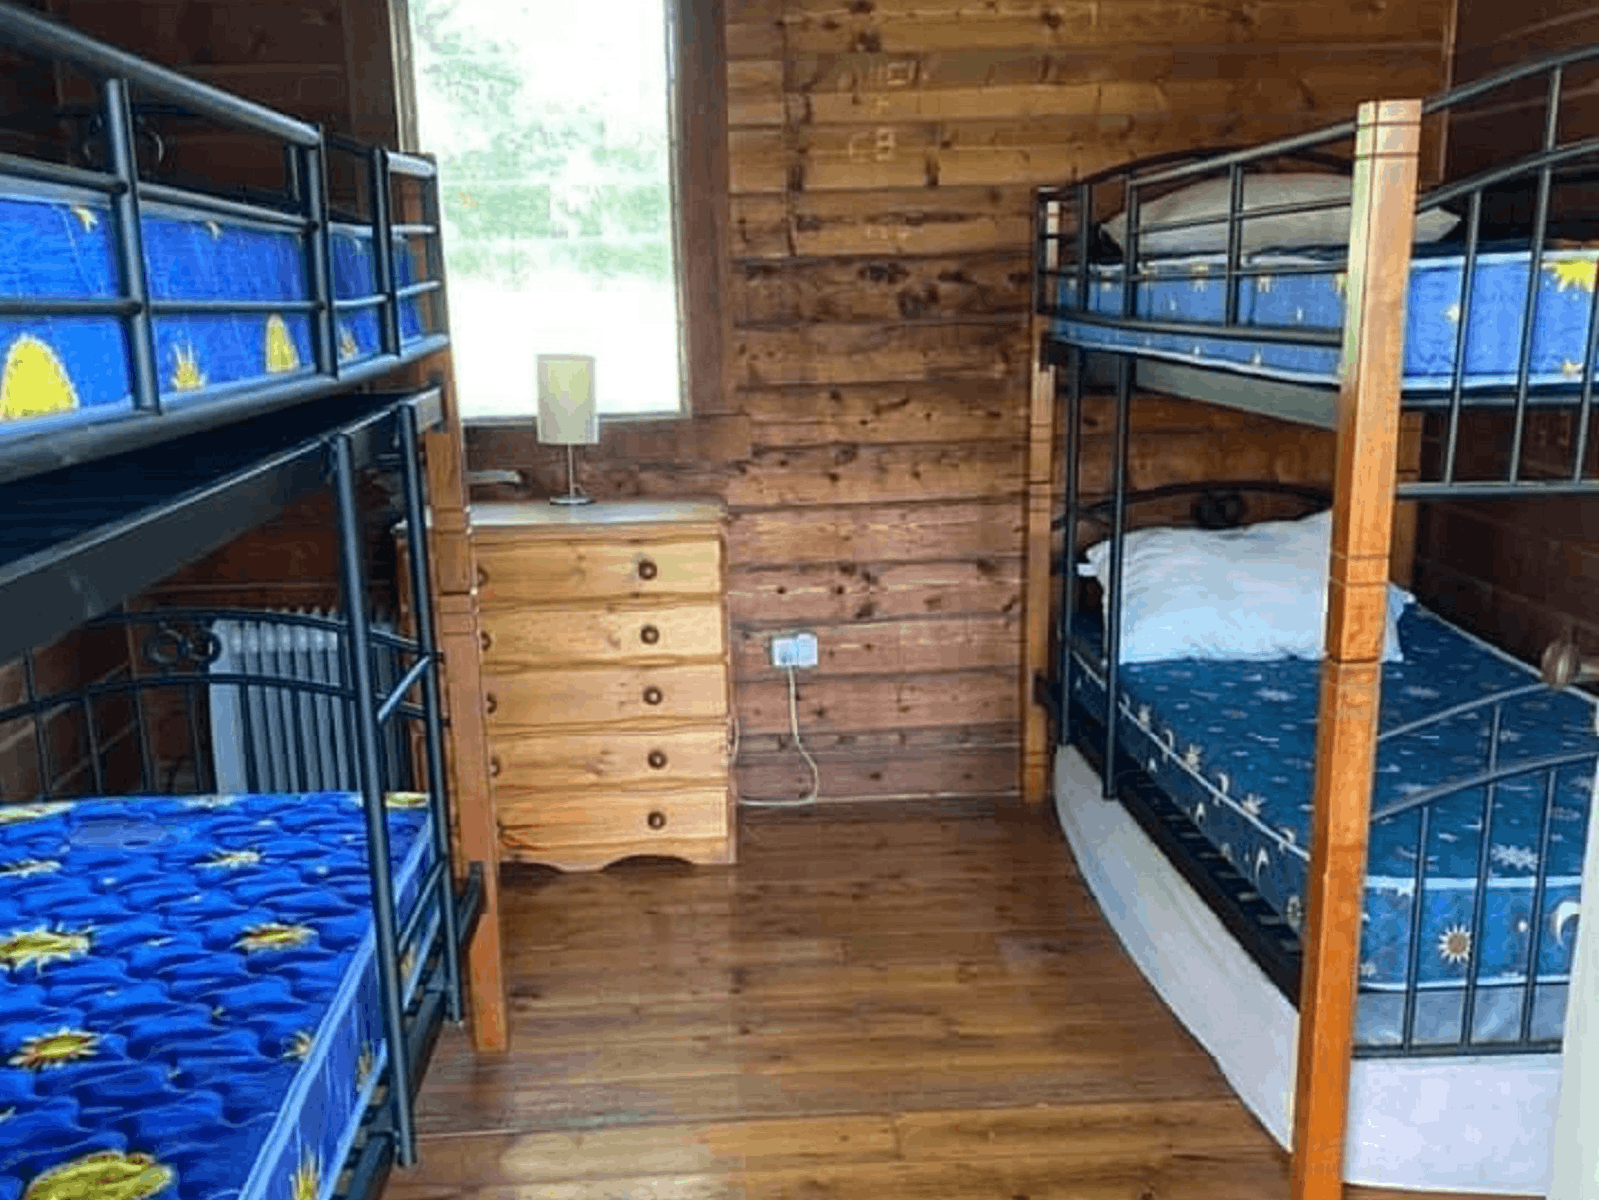 The Bunk Room